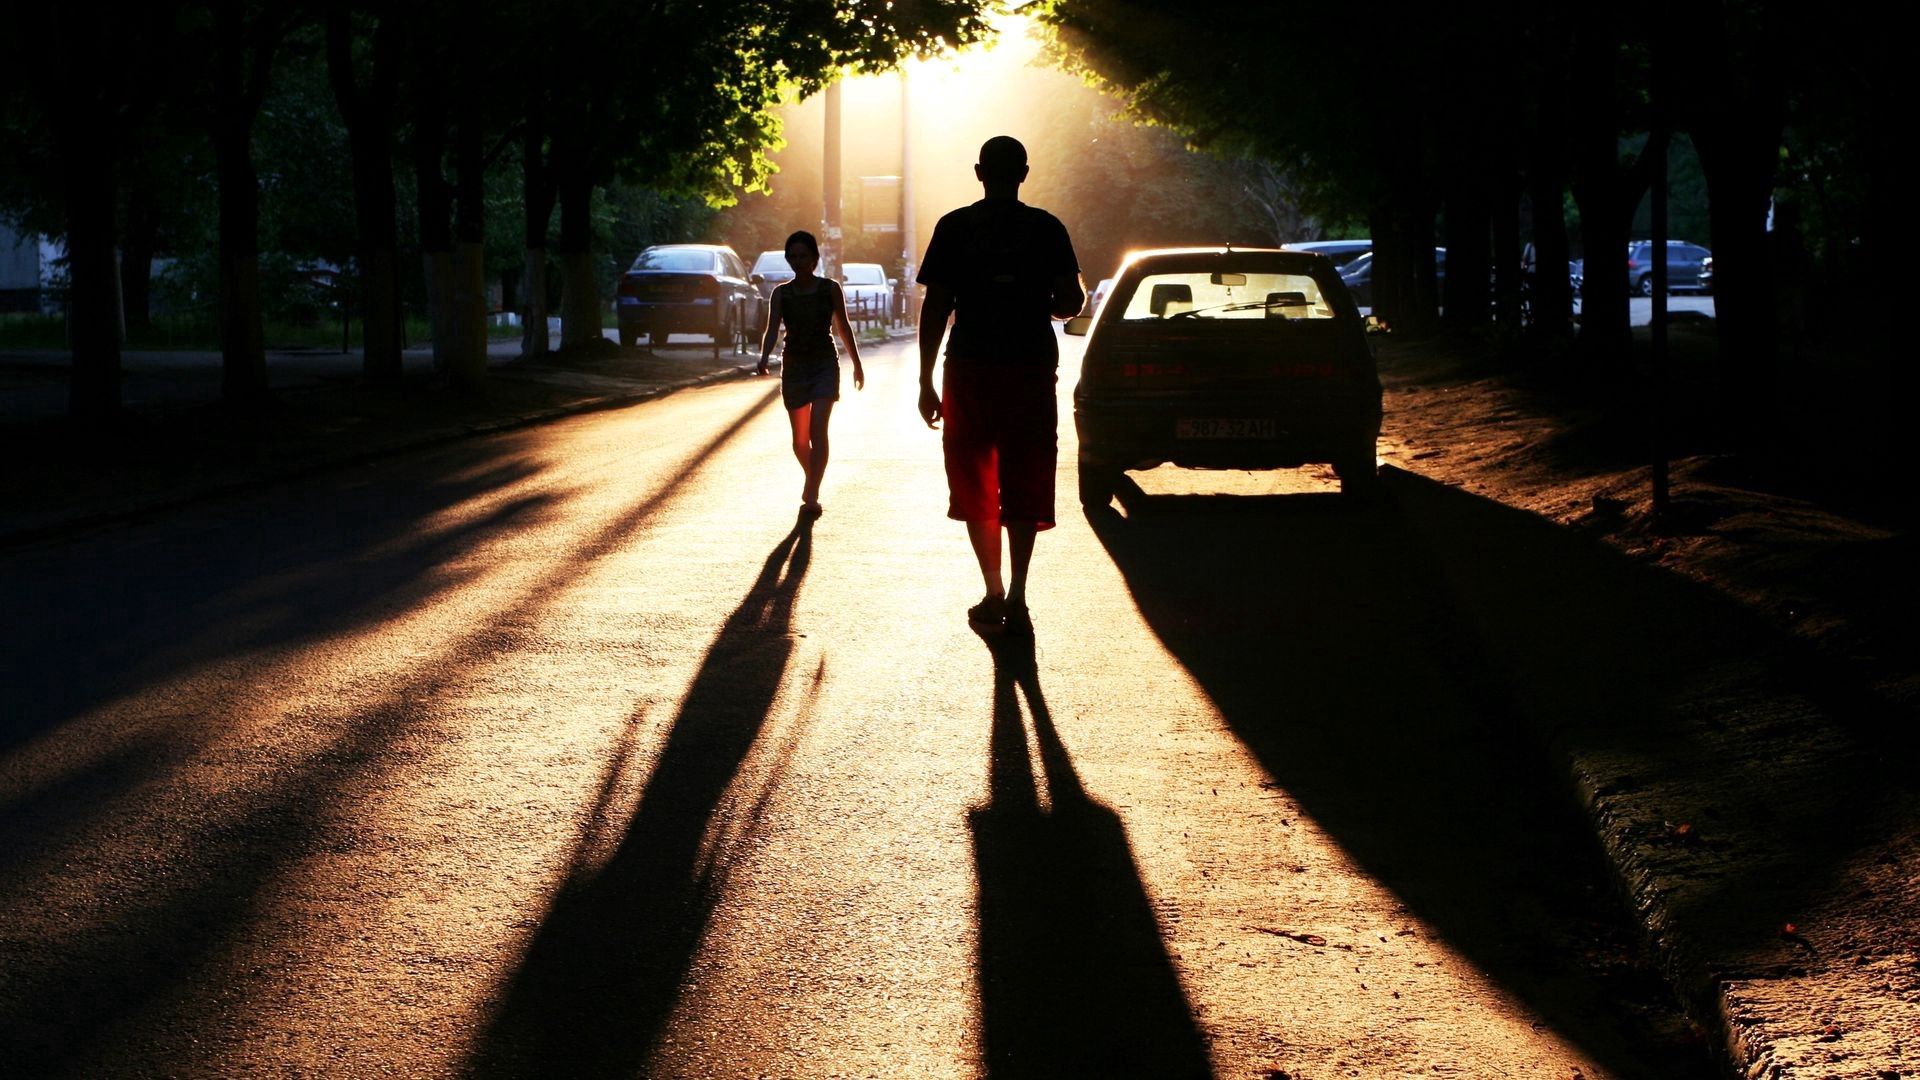 people, cars, miscellanea, miscellaneous, road, silhouettes, shadow, evening Image for desktop